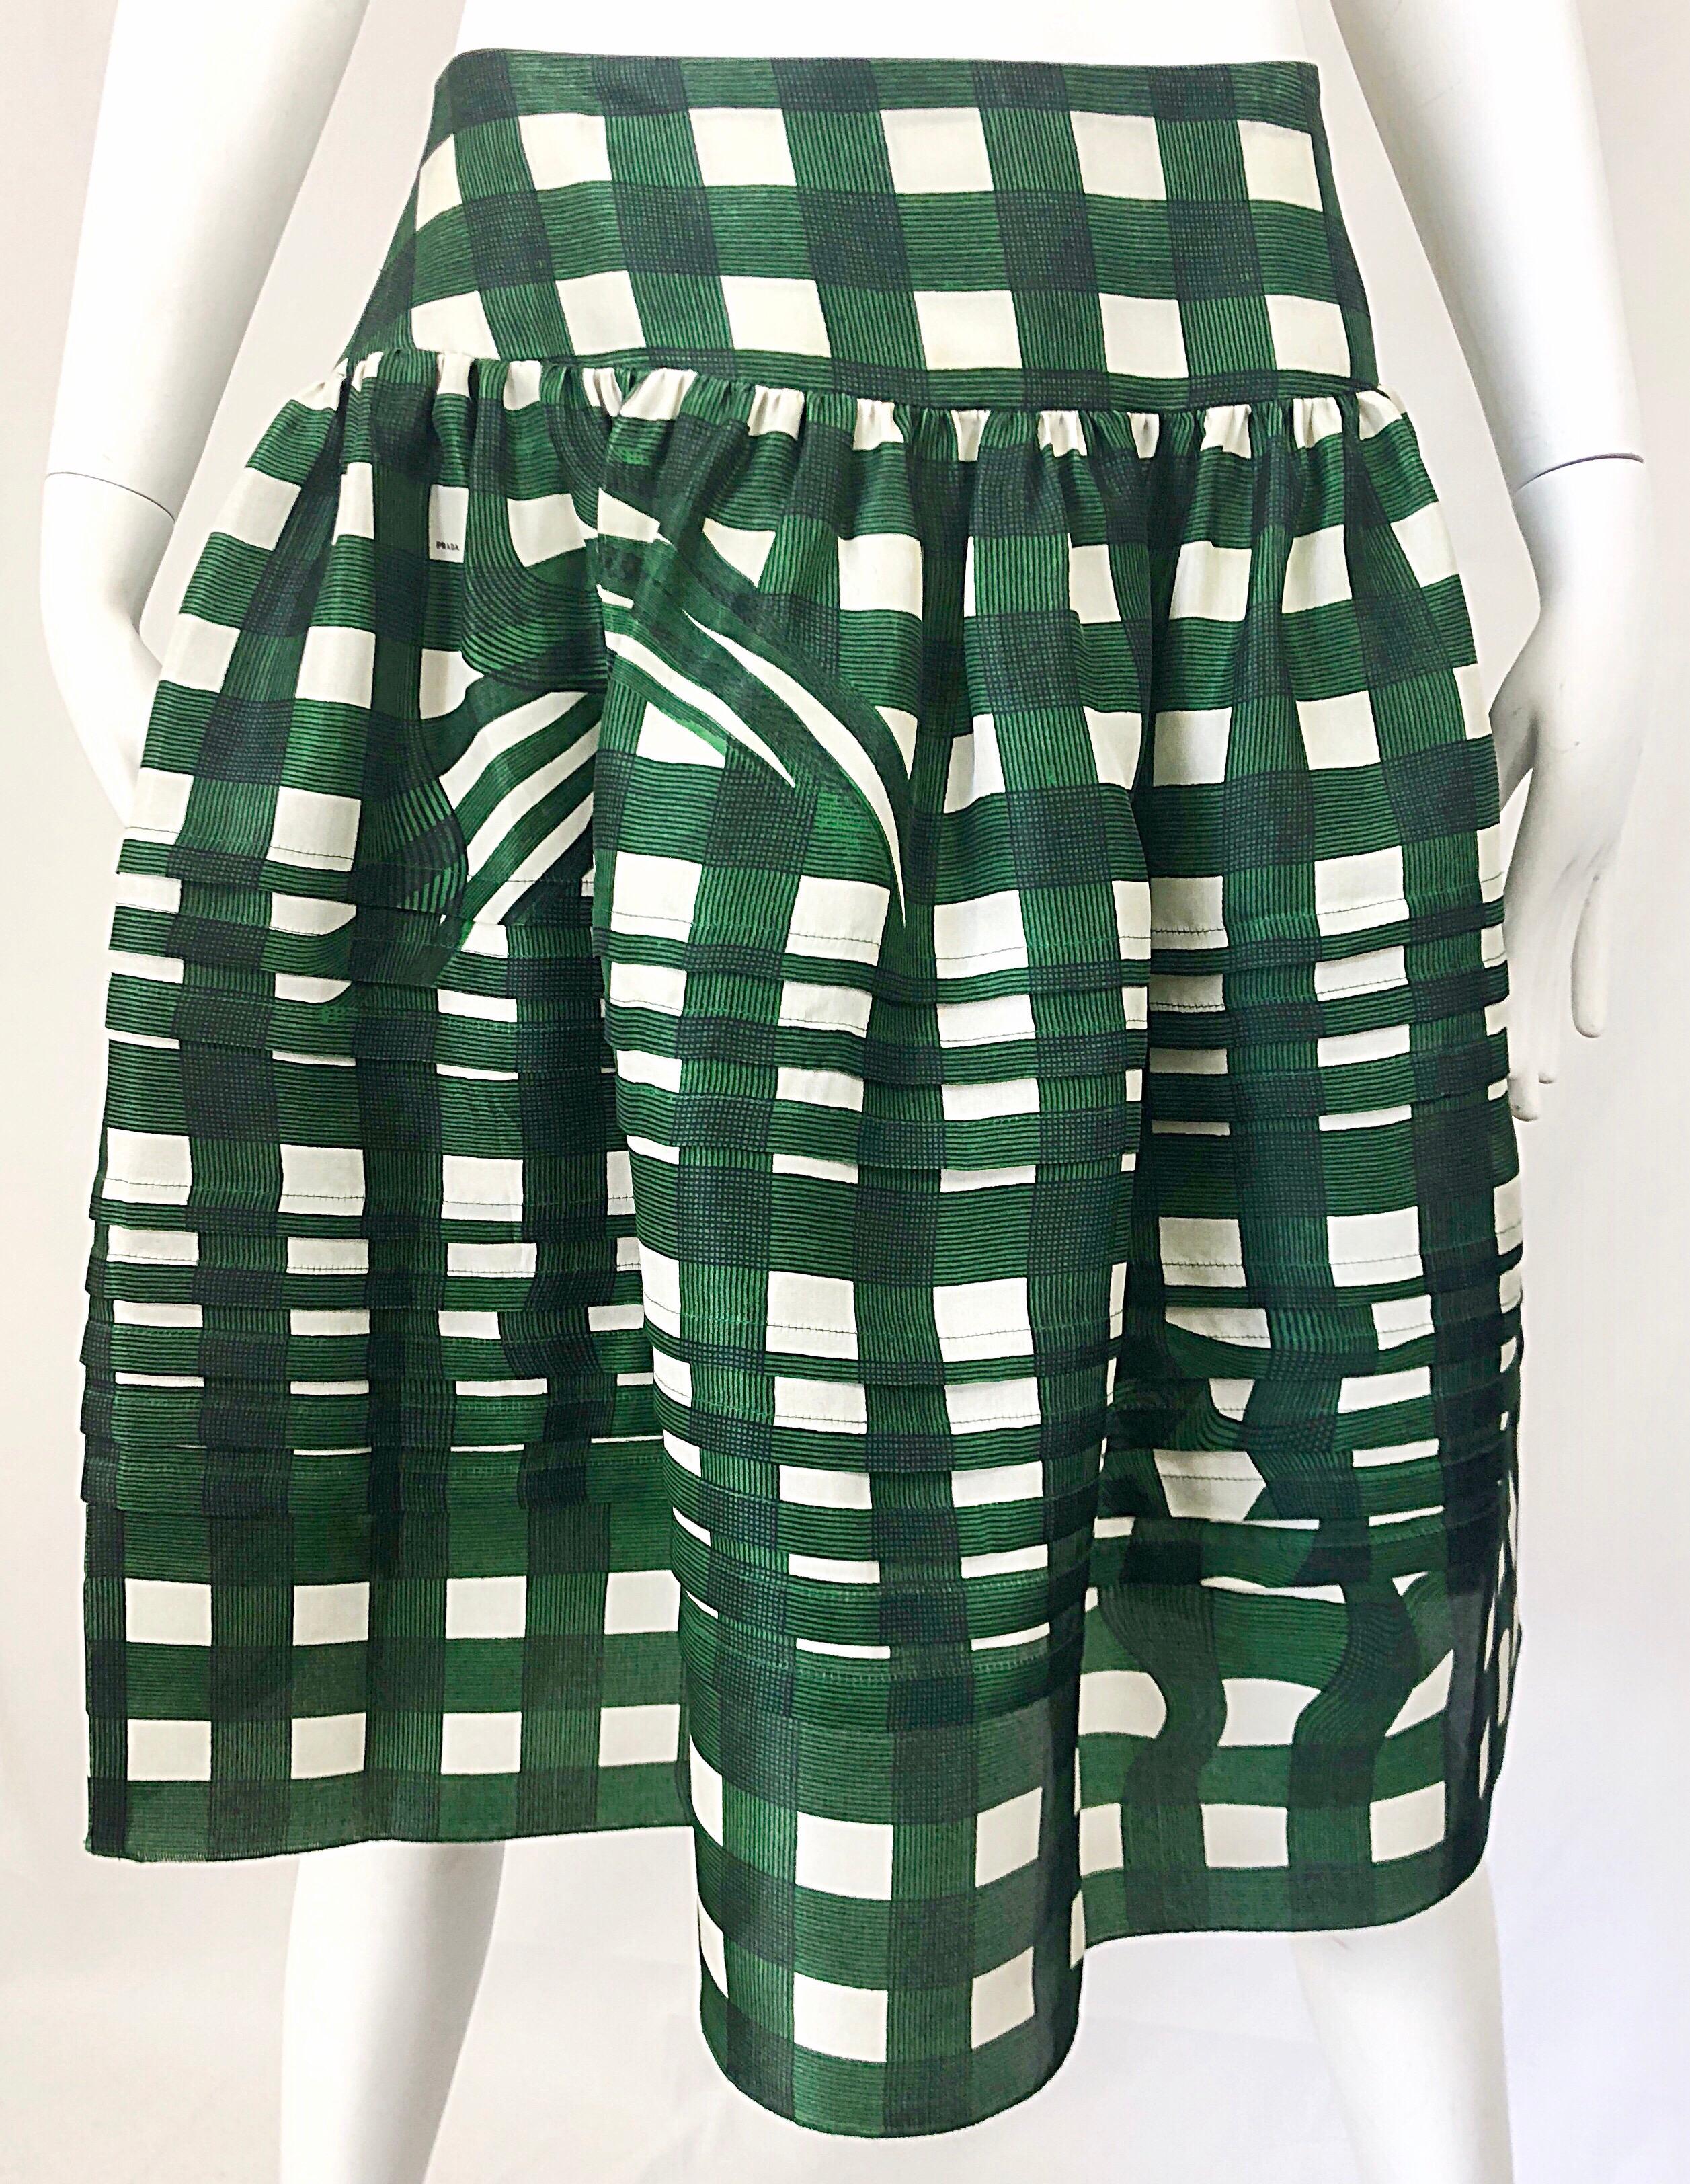 Prada Spring 2008 Runway Fairy Collection Green + White A - Line Skirt Size 40  5